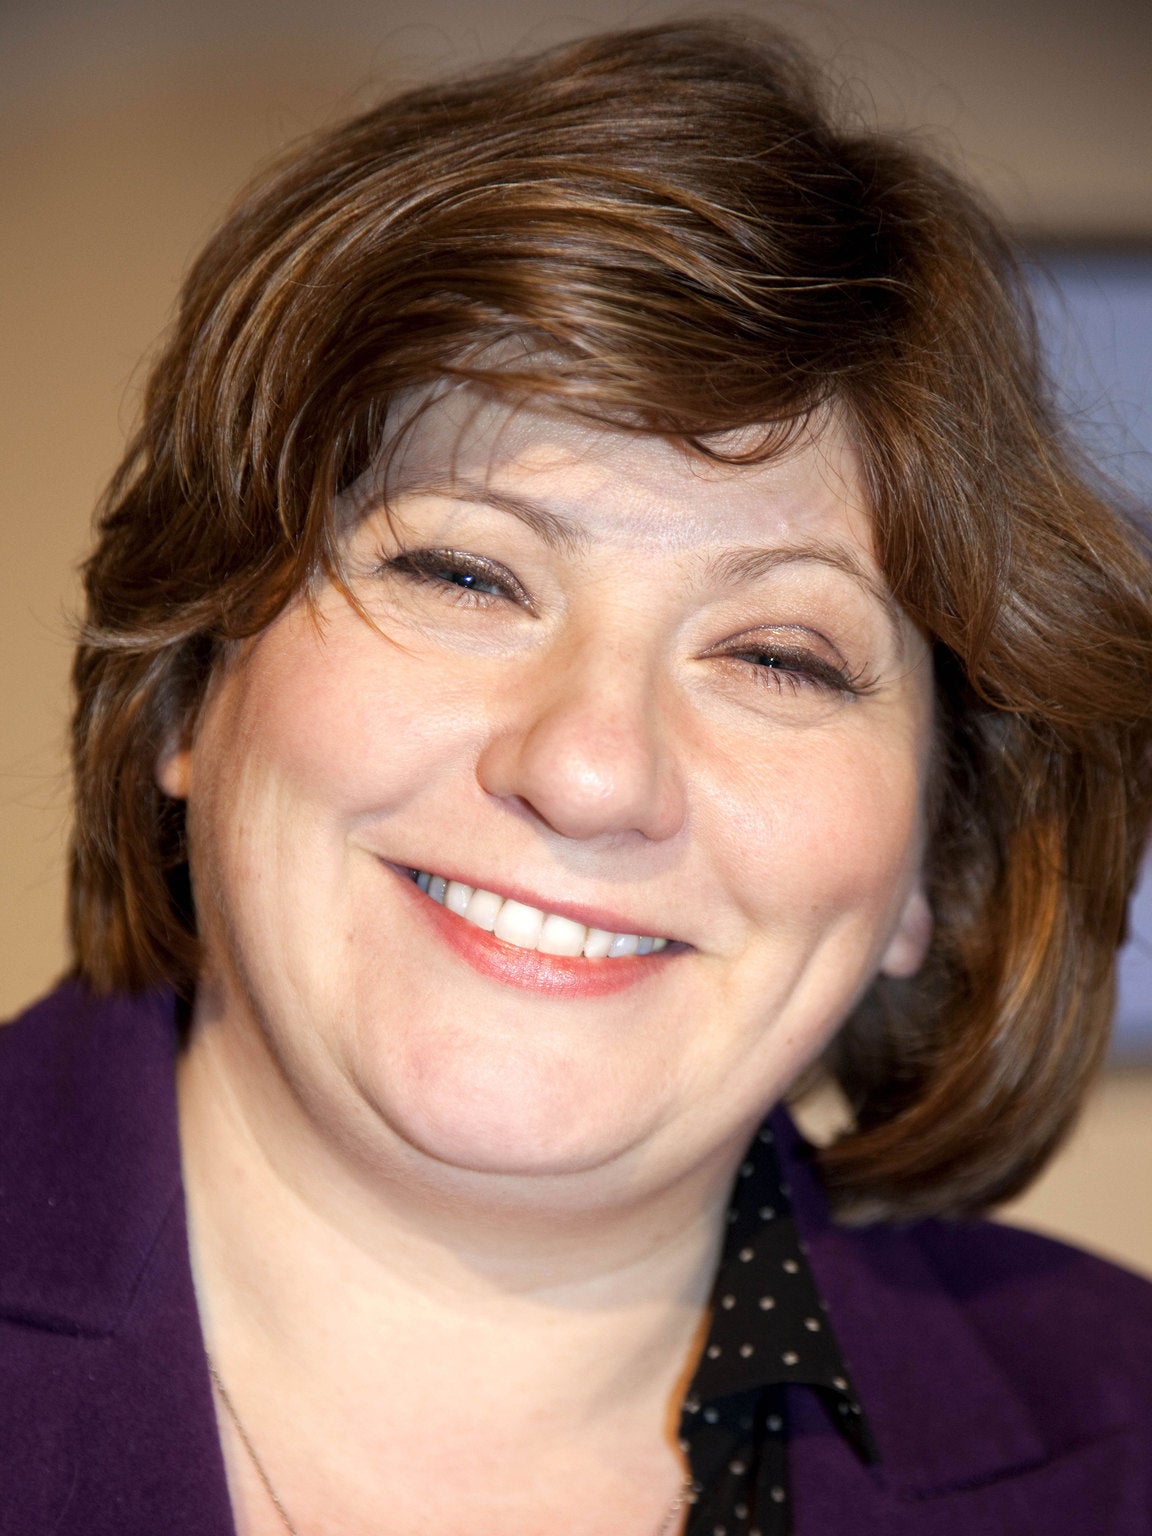 Emily Thornberry MP for Islington South, pictured in 2011